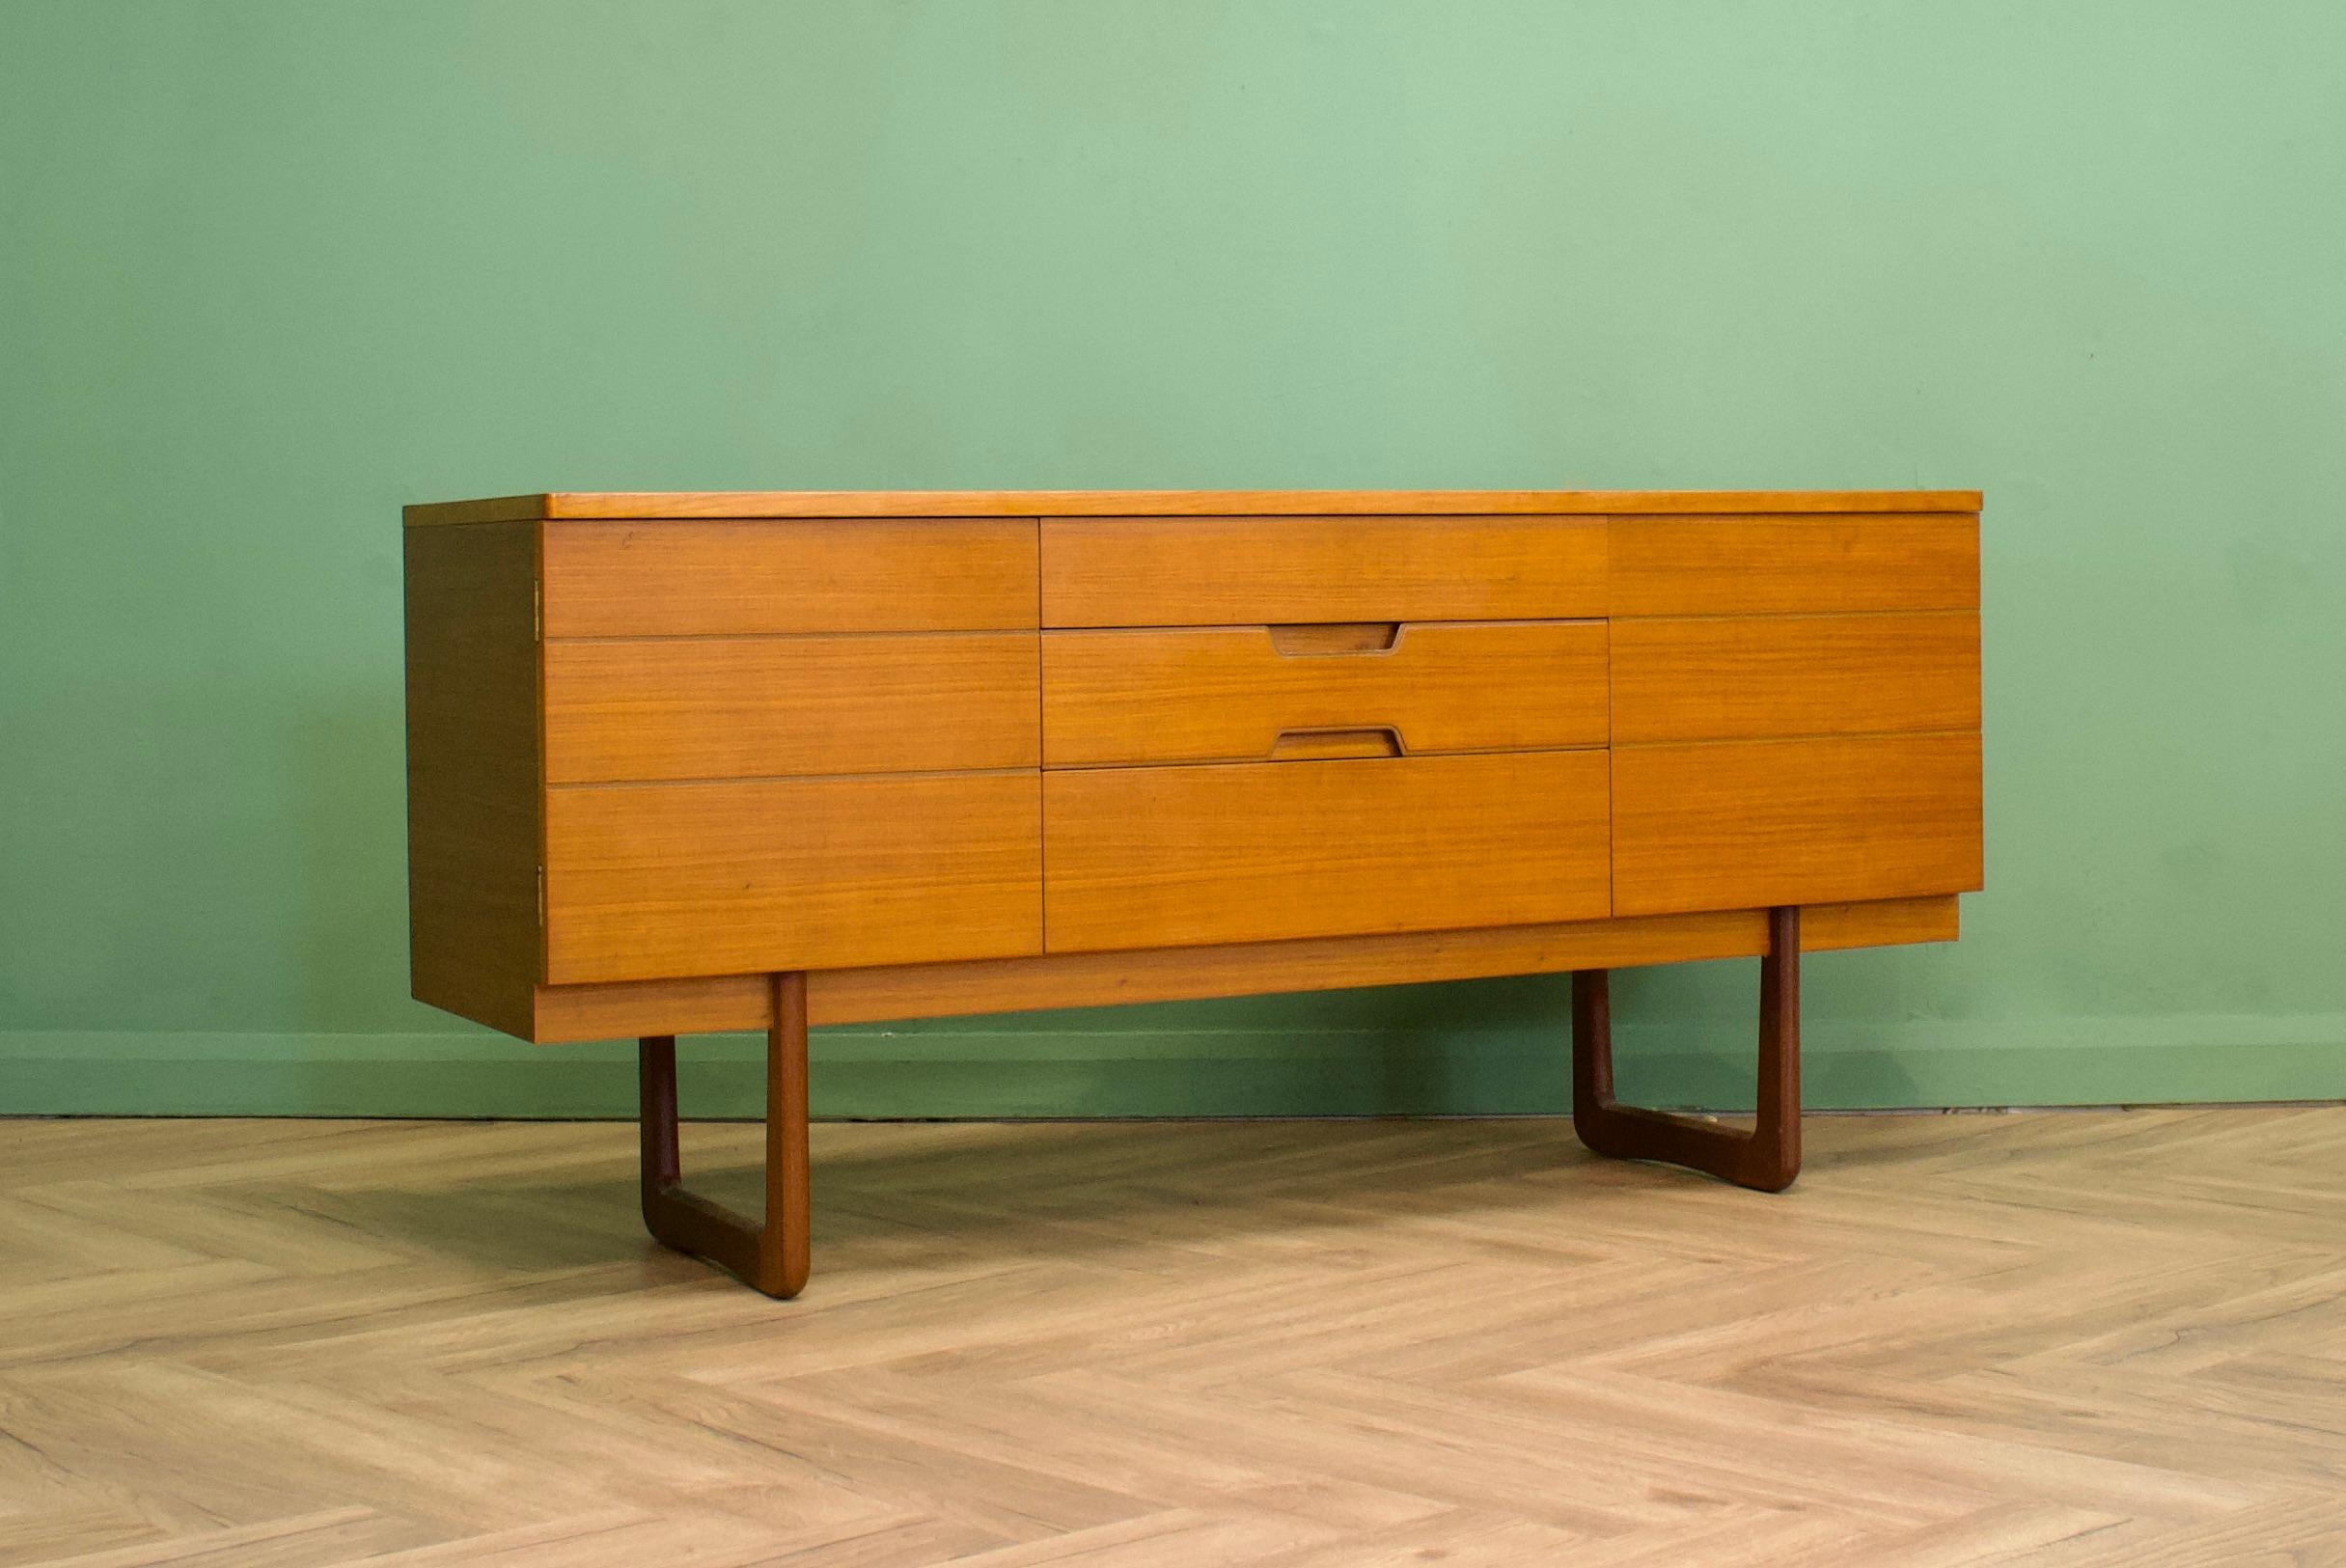 A teak compact sideboard by Gunther Hoffstead for Uniflex, which was originally a dressing chest  - Circa 1960s

It features three drawers and two push to open cupboards - each contain a fixed shelf

The piece has a minimalist modern design and to